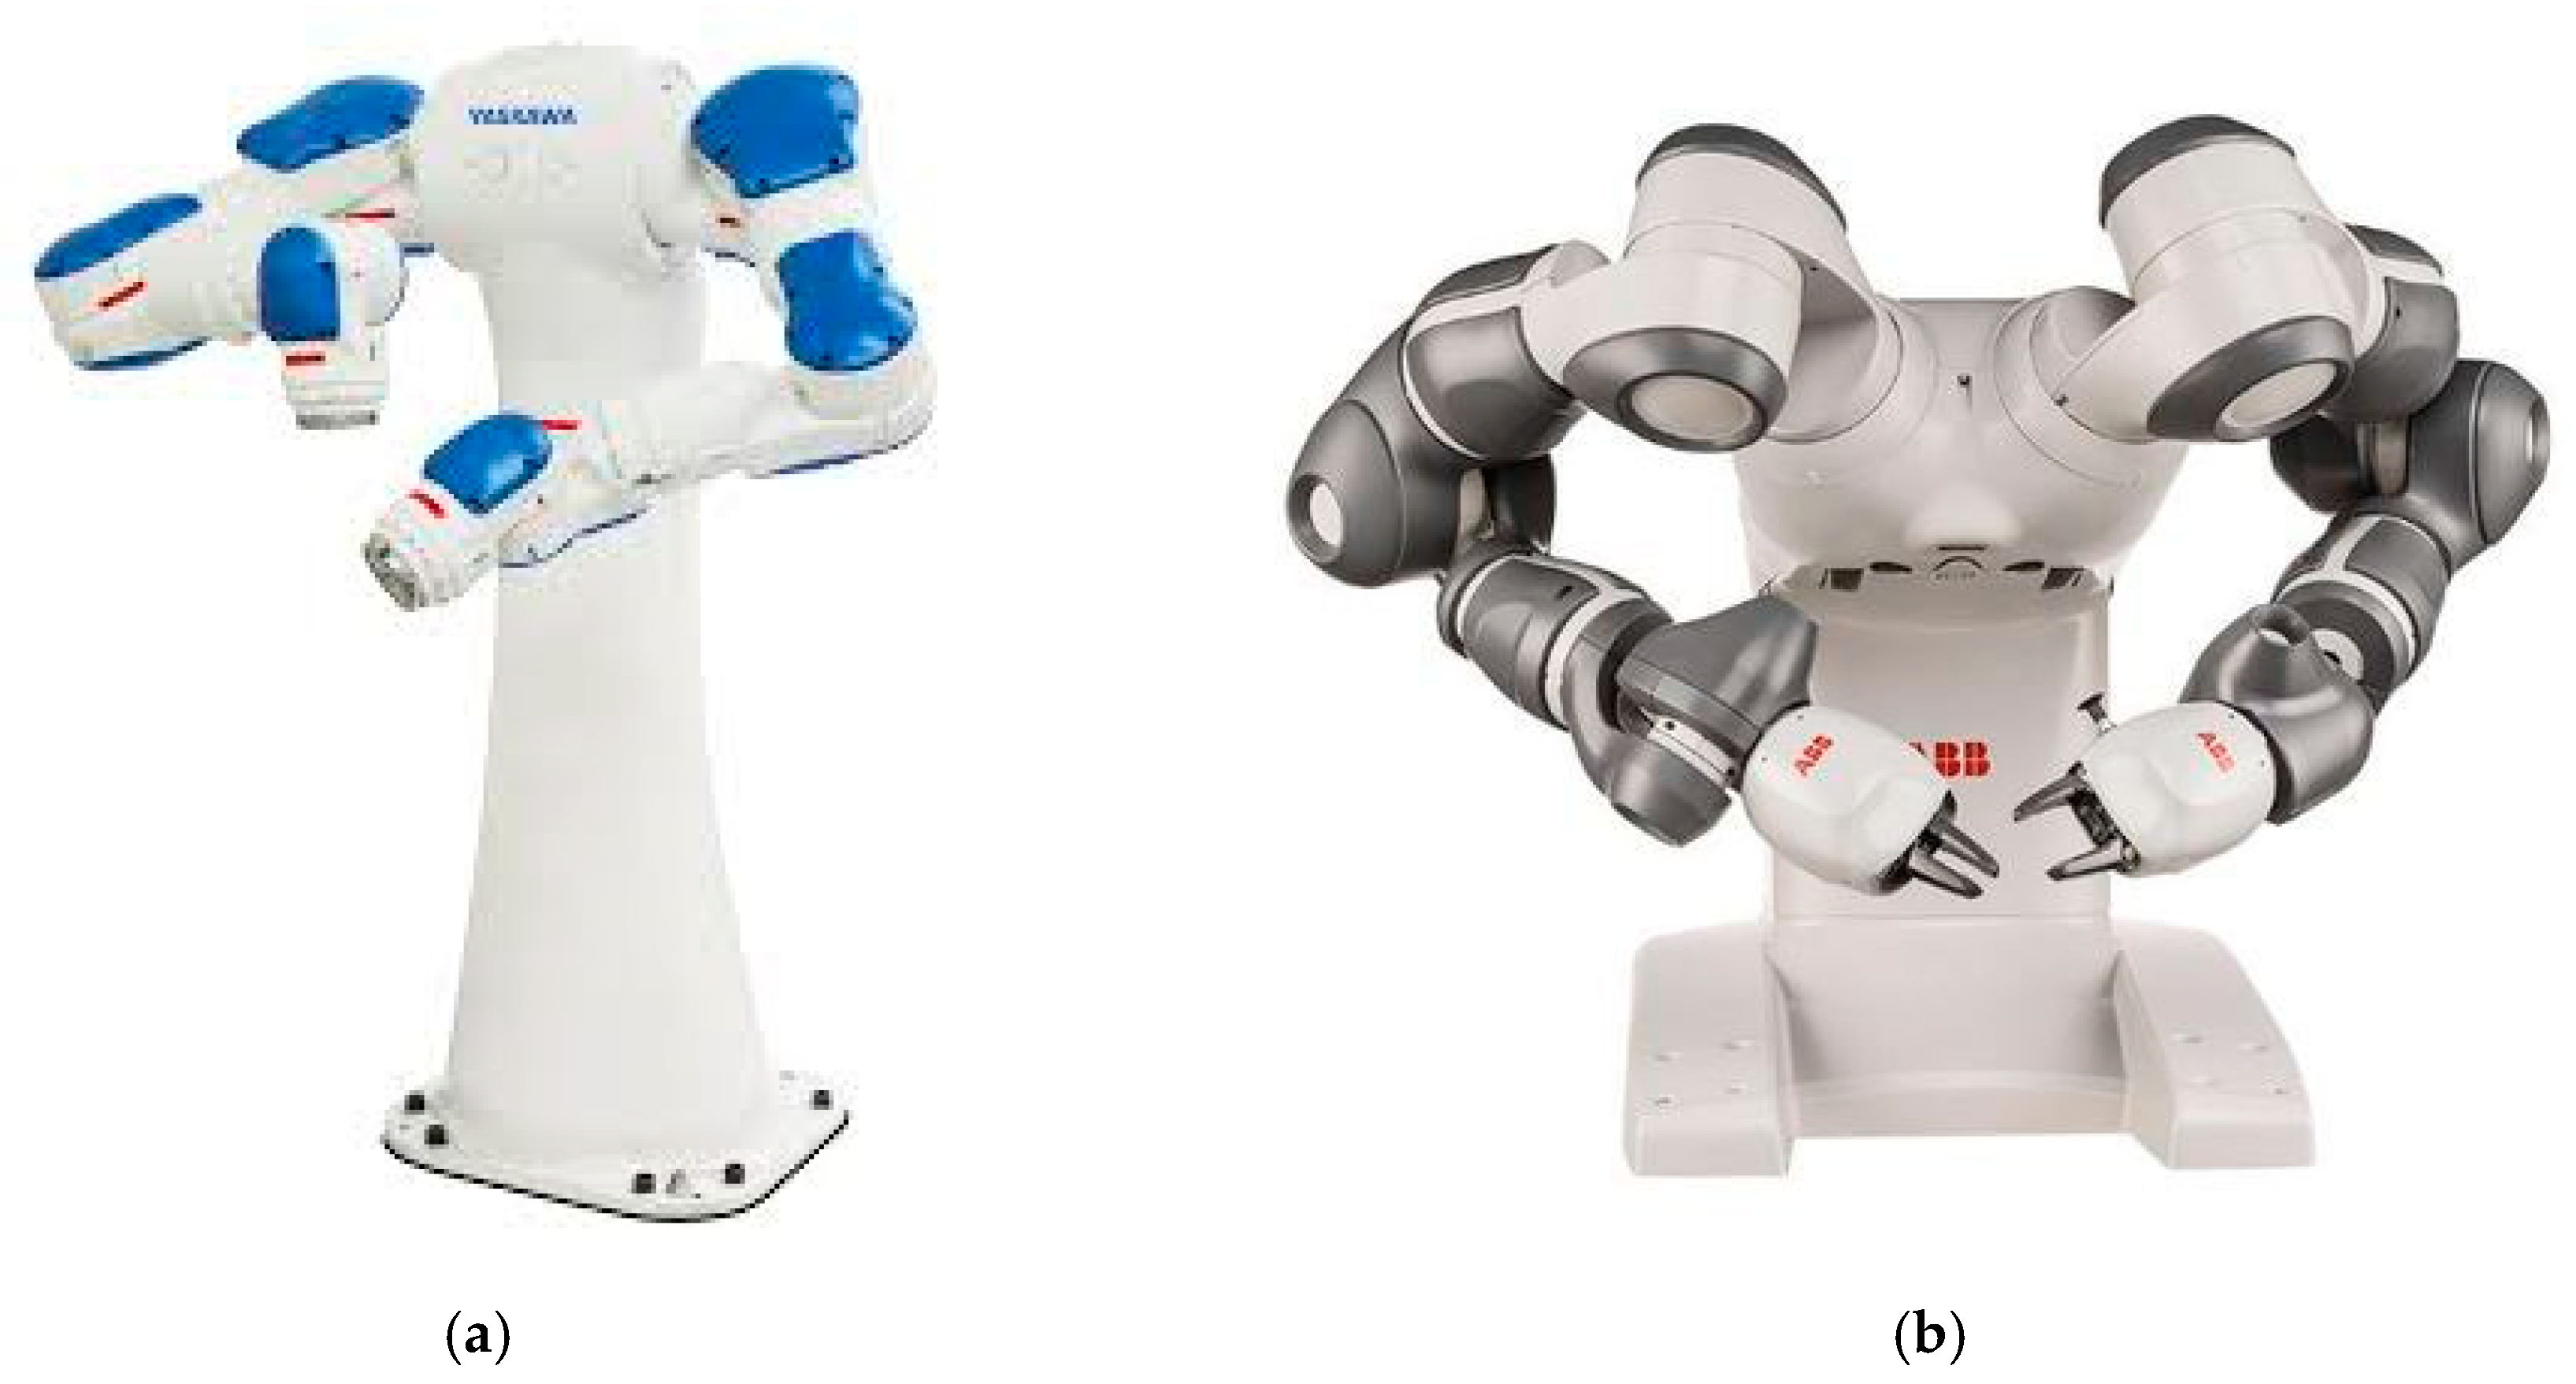 Proceedings | Free Full-Text | Robotic Arms with Anthropomorphic Grippers  for Robotic Technological Processes